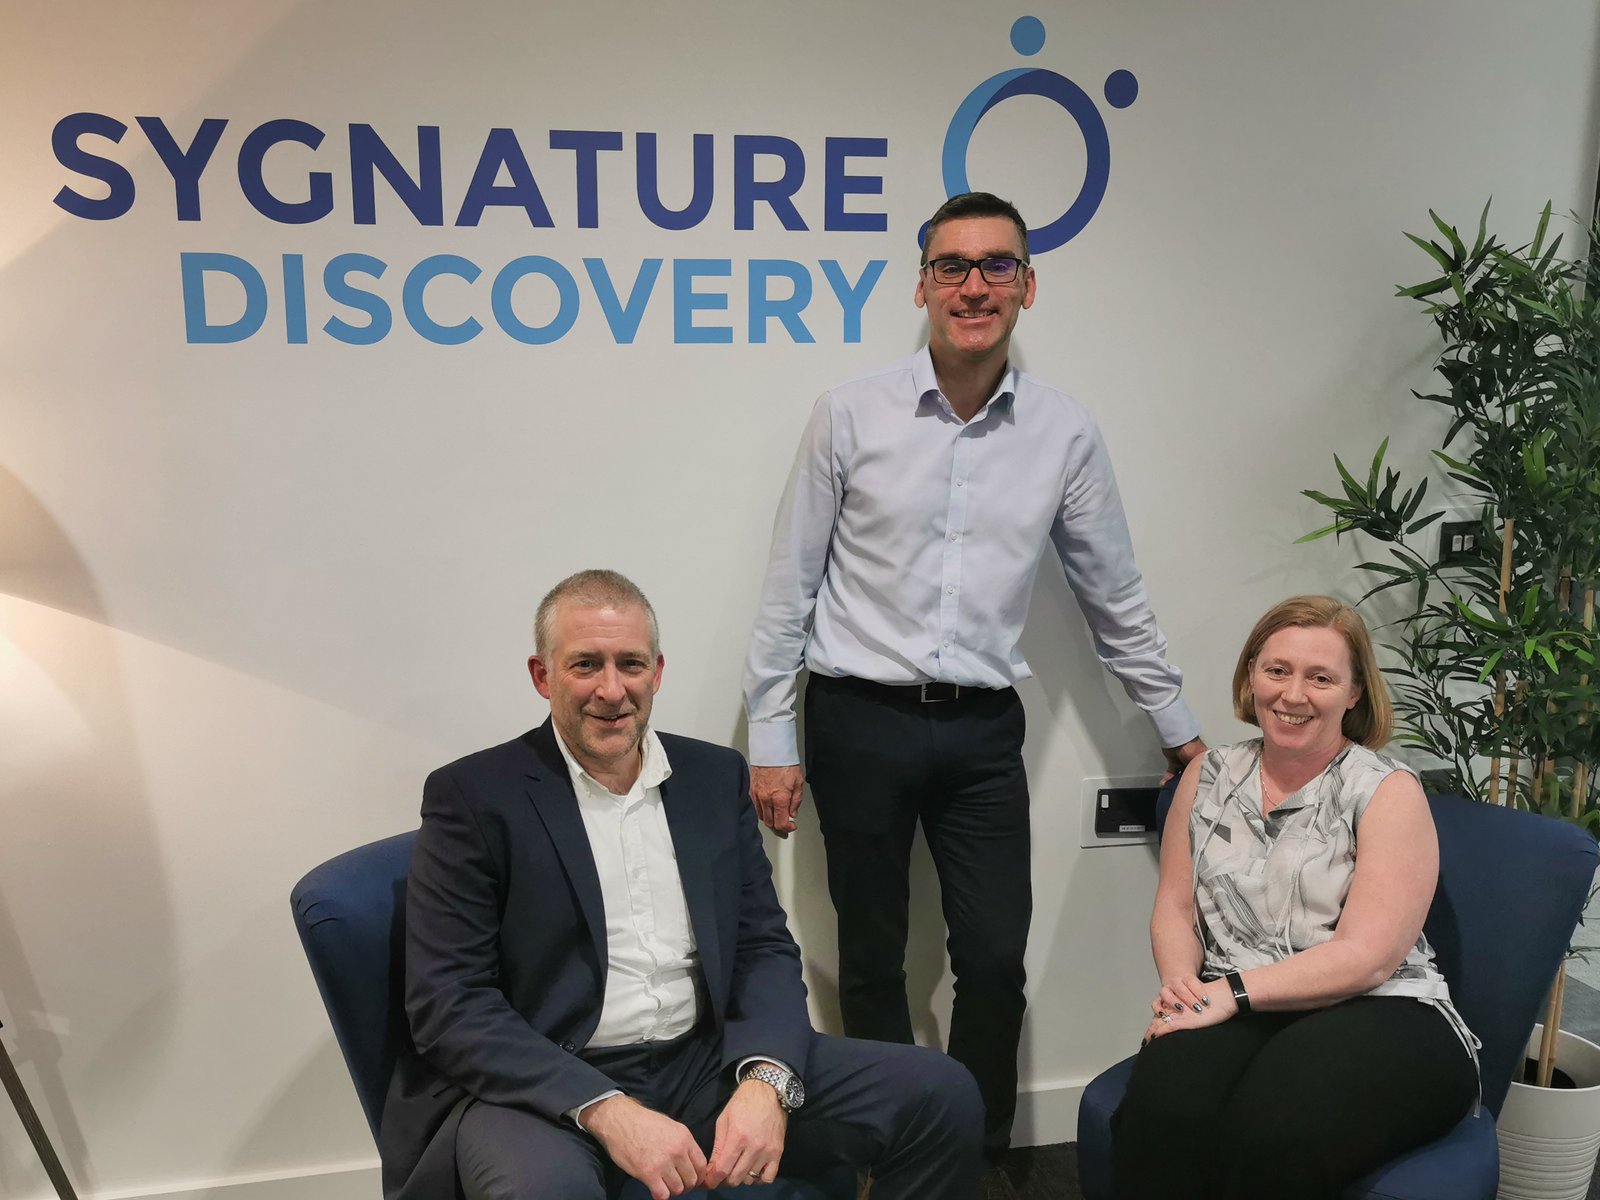 Pictured L-R: Sygnature Discovery's Robert Kime, Clive Dilworth and Sally Lee